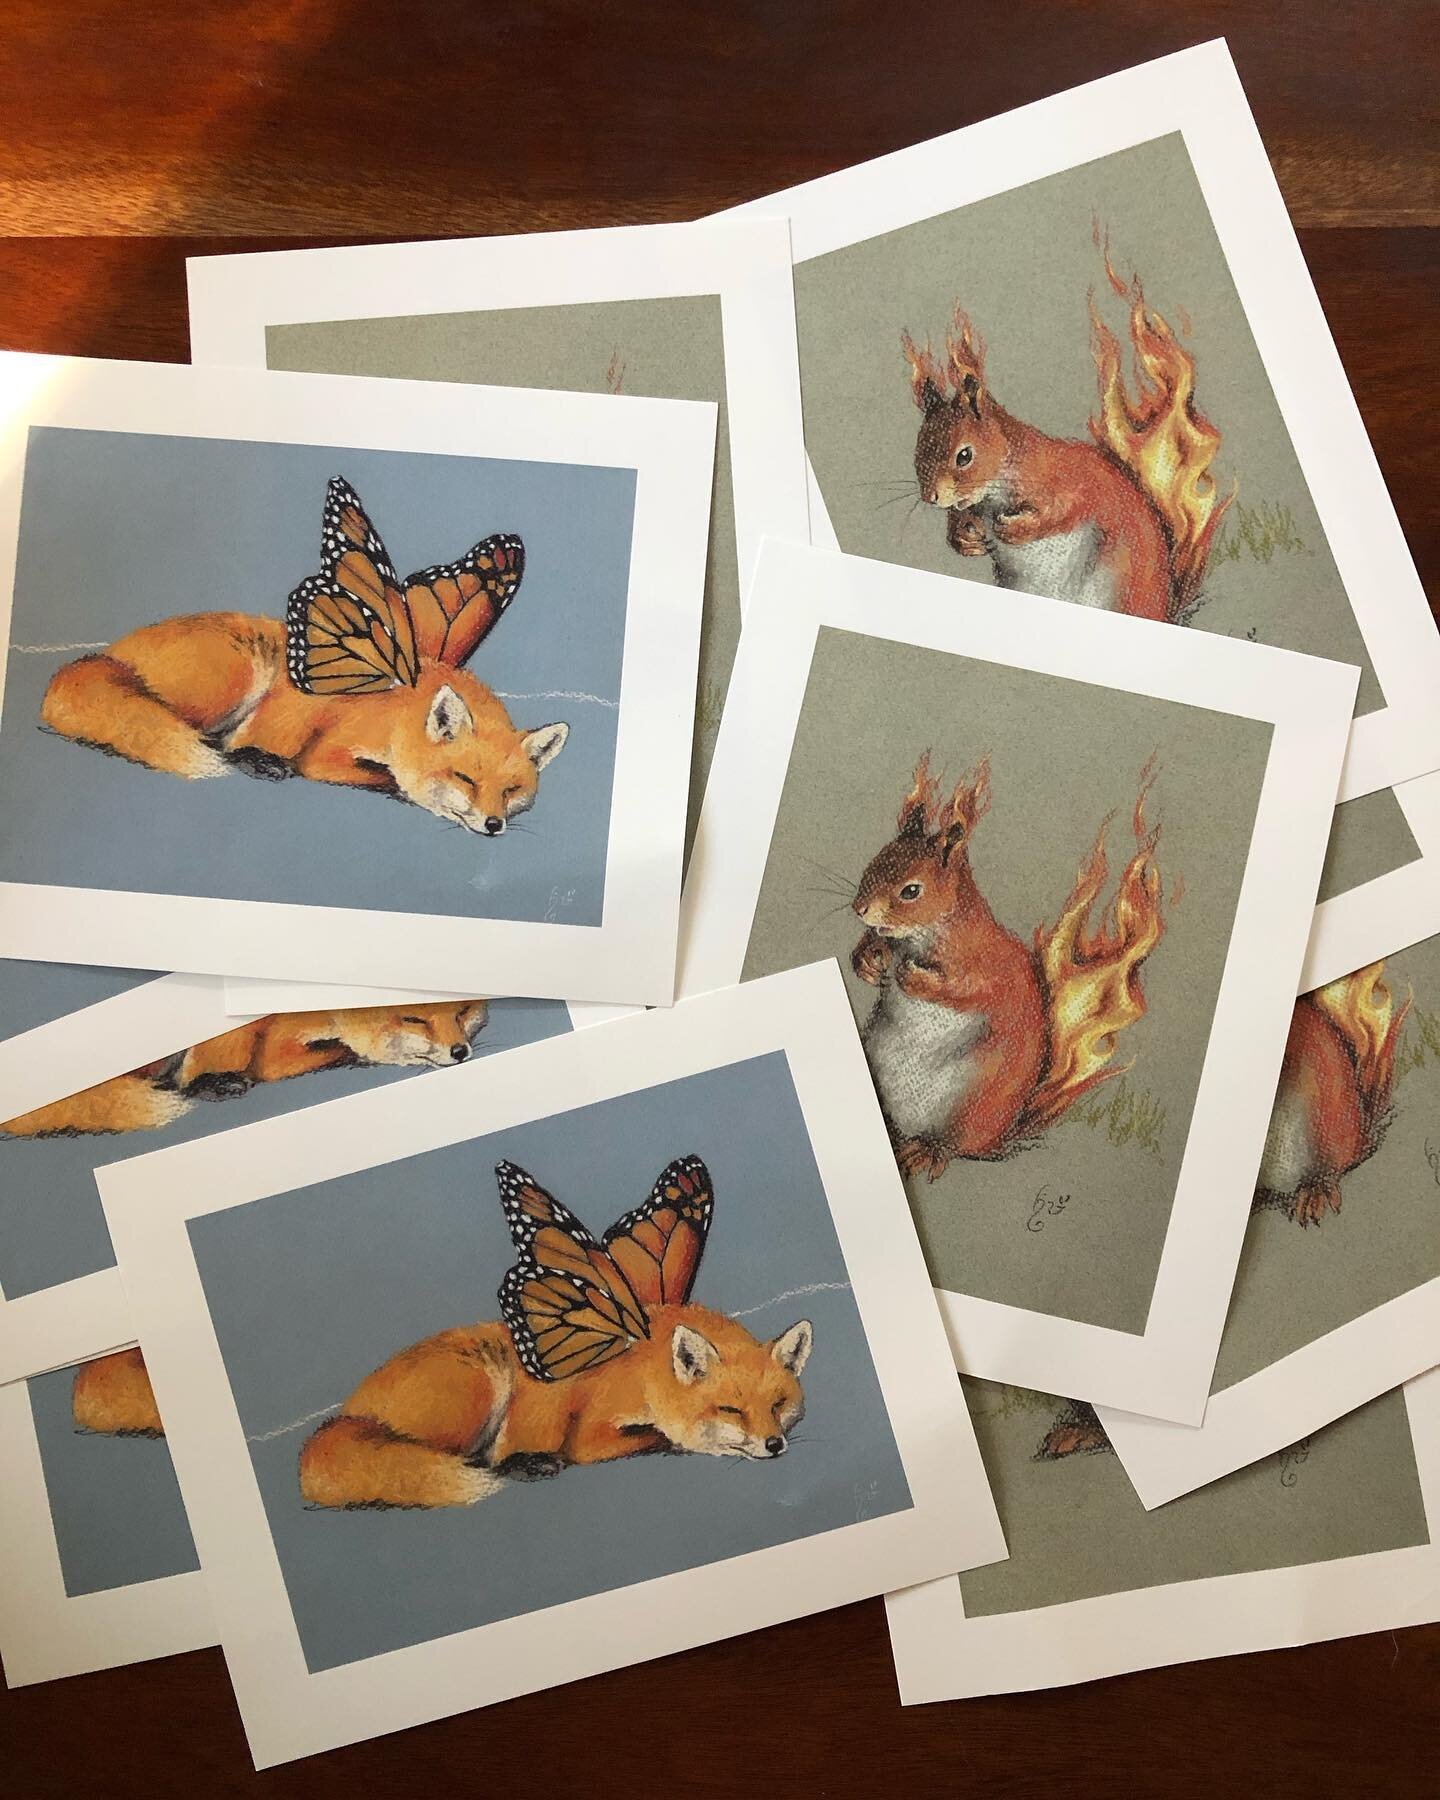 50% off select prints!
Some prints were damaged in the mail and you can buy them off my website for $12.50 just head to annsolyst.com or follow the link in my bio. Only 5 of each creature left&hellip;
.
.
#sale #prints #artprints #fox #squirrel #draw